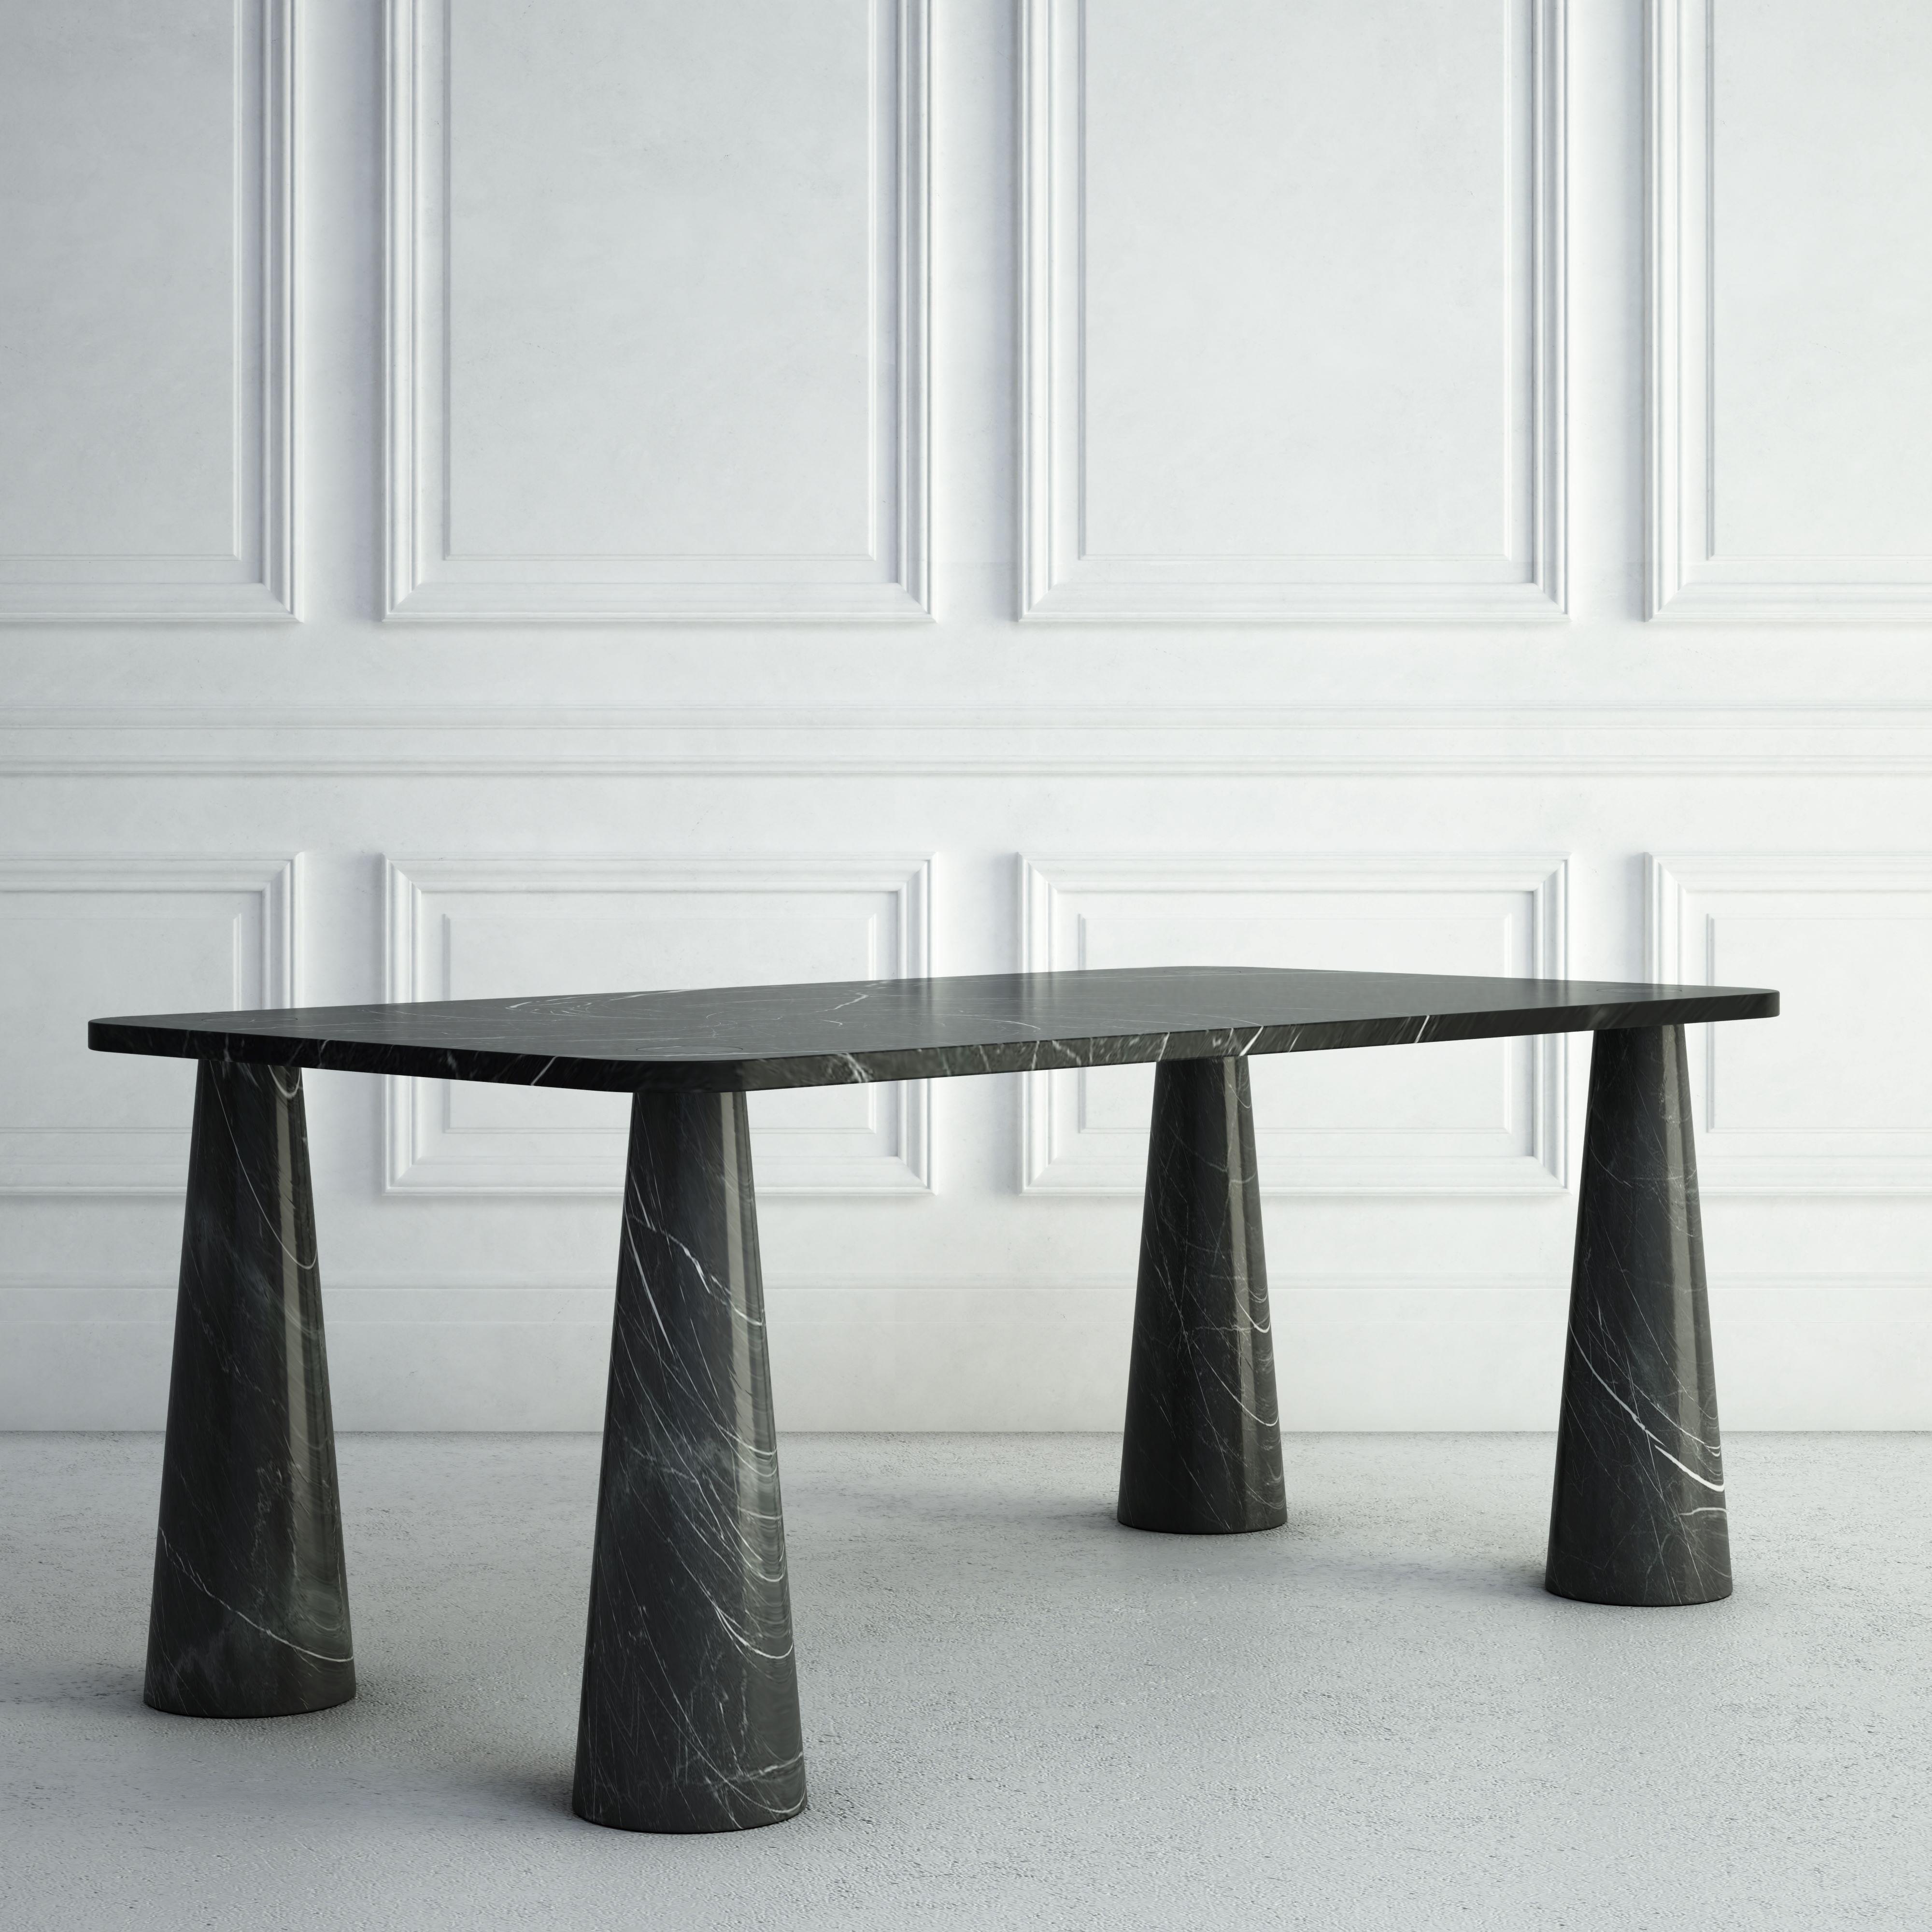 The Simone is a whimsical modern dining table.  The top is made from an elegant thin rectangular stone slab.  Each of the four legs is positioned directly below a corner of the top.  The legs are rounded, but taper in as they reach the top, giving